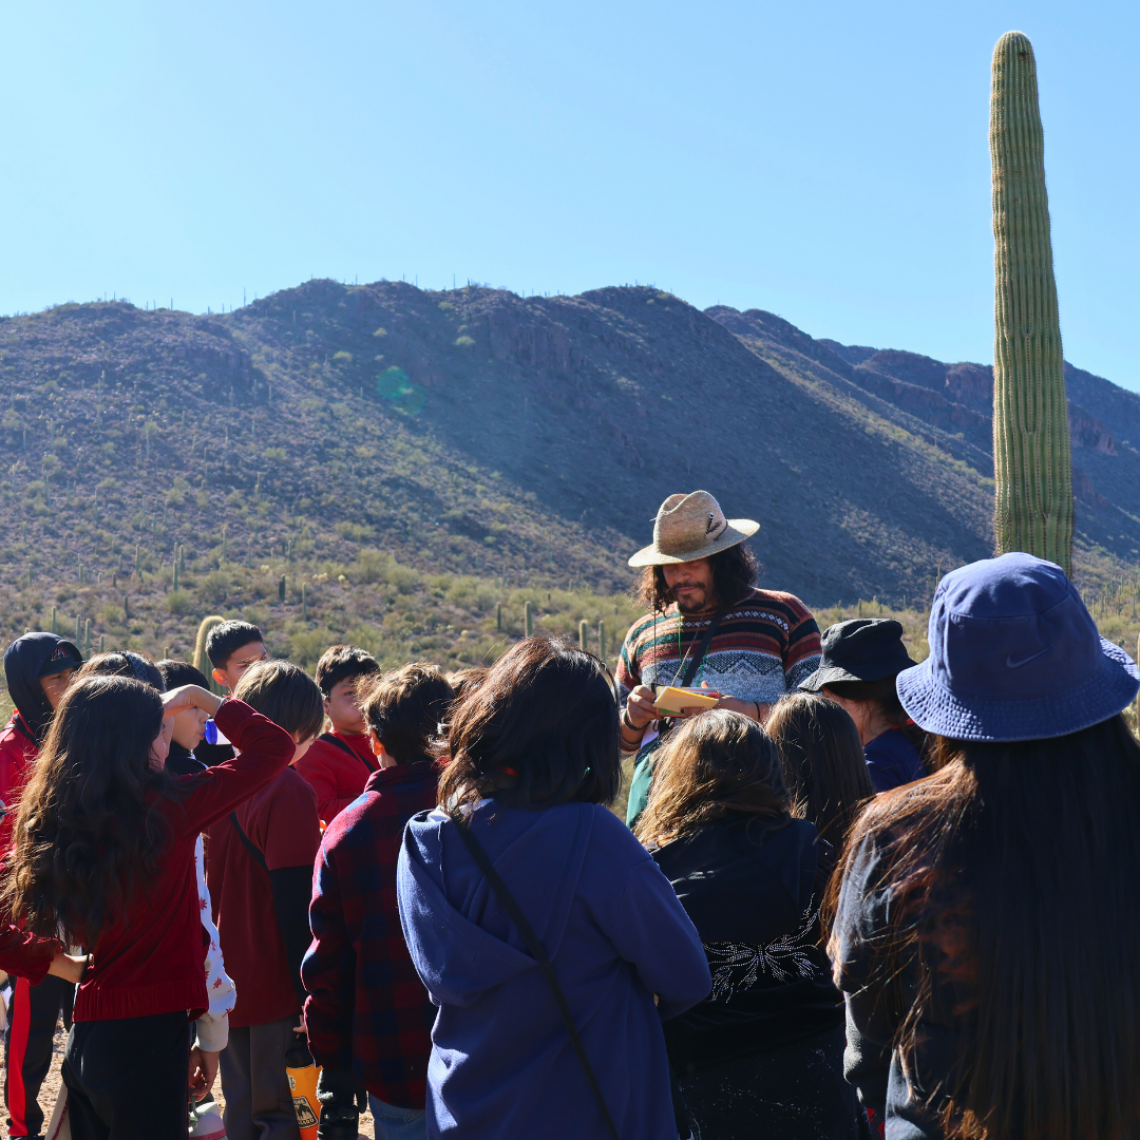 group leader speaking to a group of kids, mountain scape and sahuaro as a backdrop